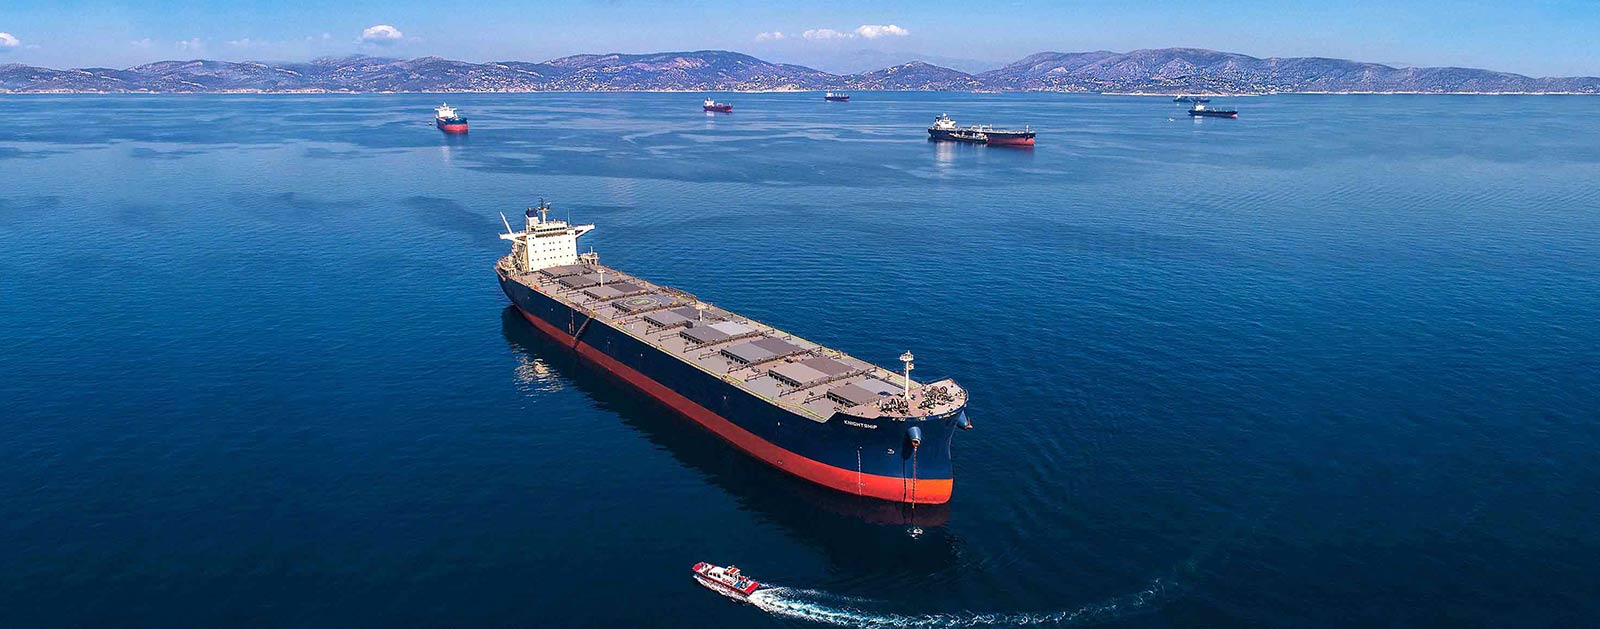 Seanergy Maritime Holdings Corp. Announces Successful Delivery of the Capesize Vessel mv Goodship